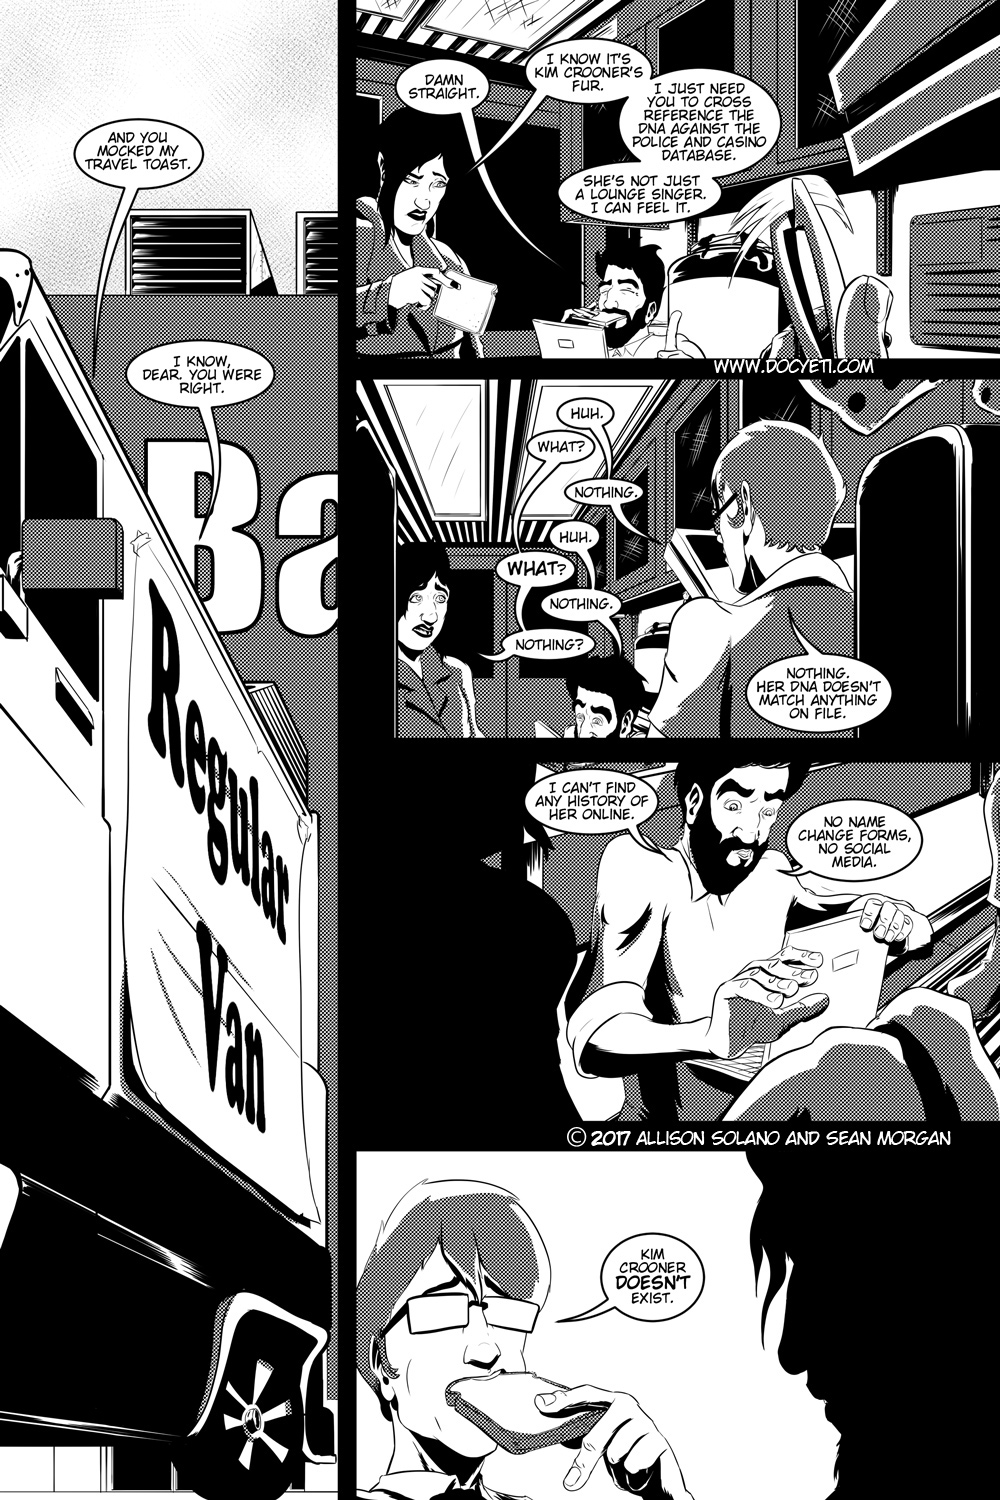 Flight of the Mothman! Issue 1 page 12